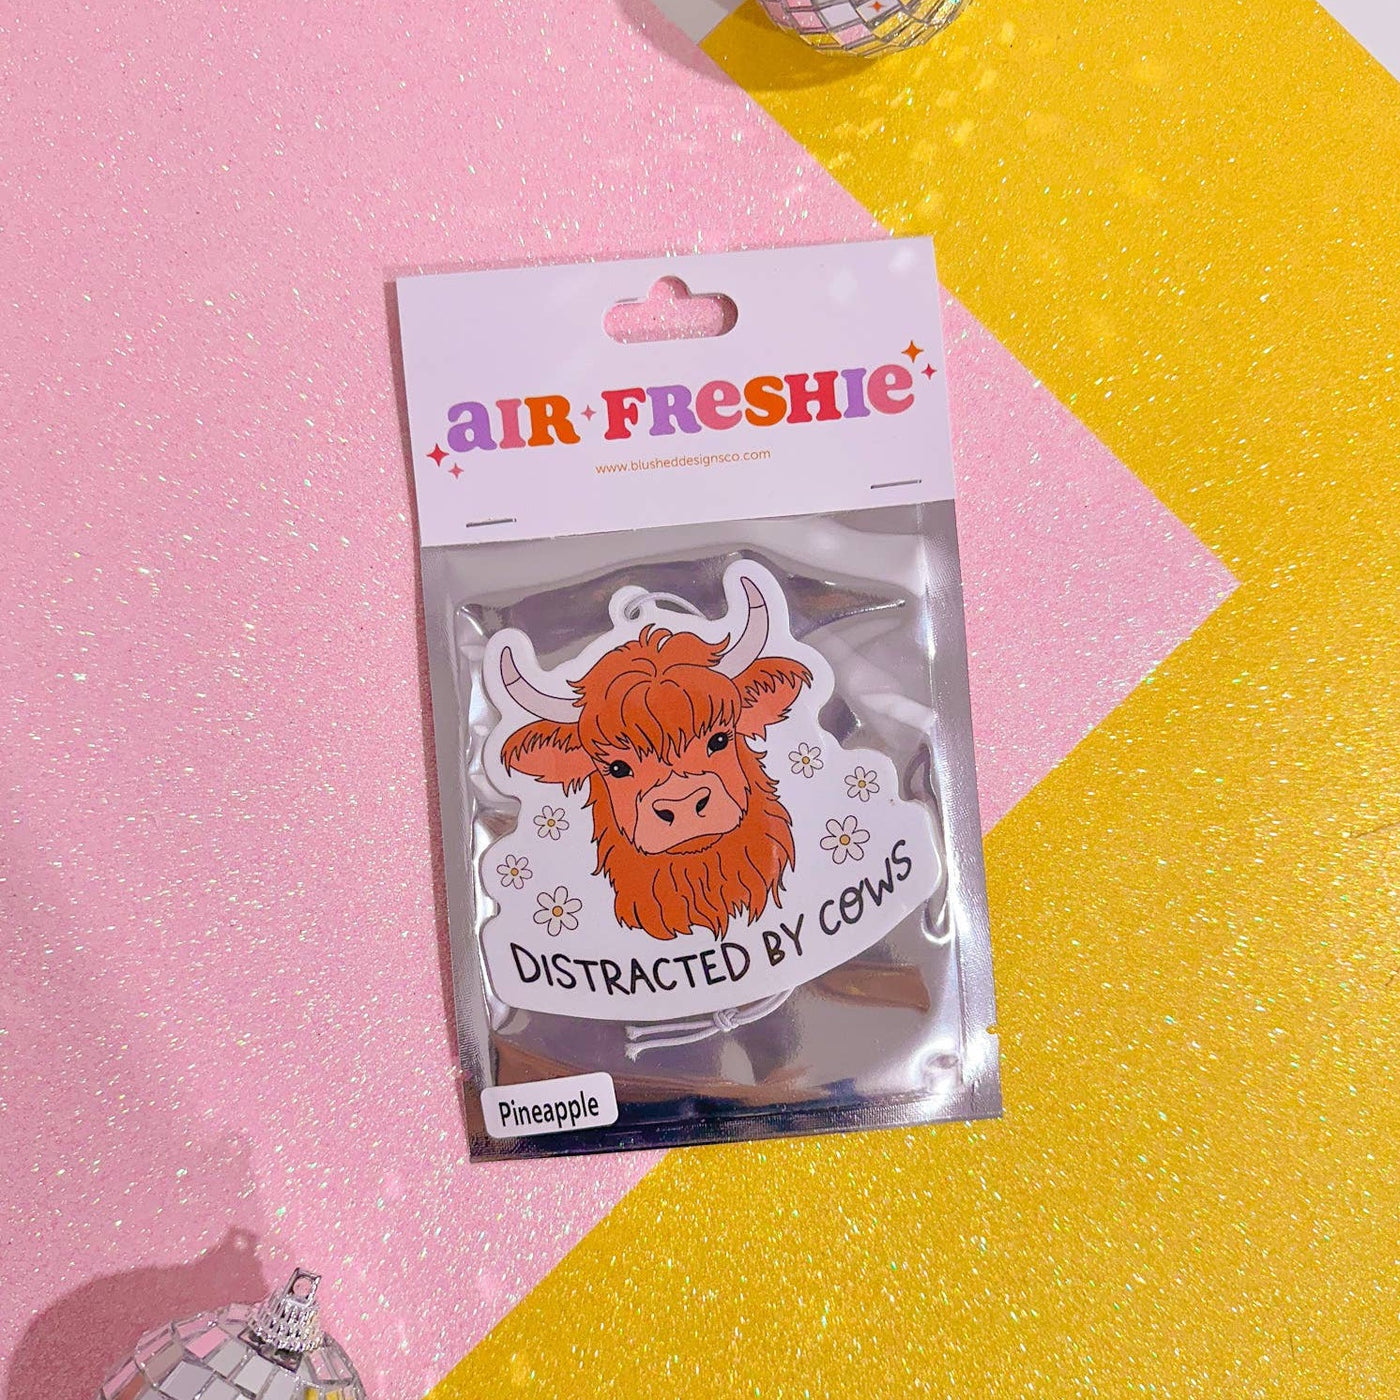 BlushedDesigns Co. - Distracted by Cows Car Air Freshener (Pineapple Scent) - The Local Space